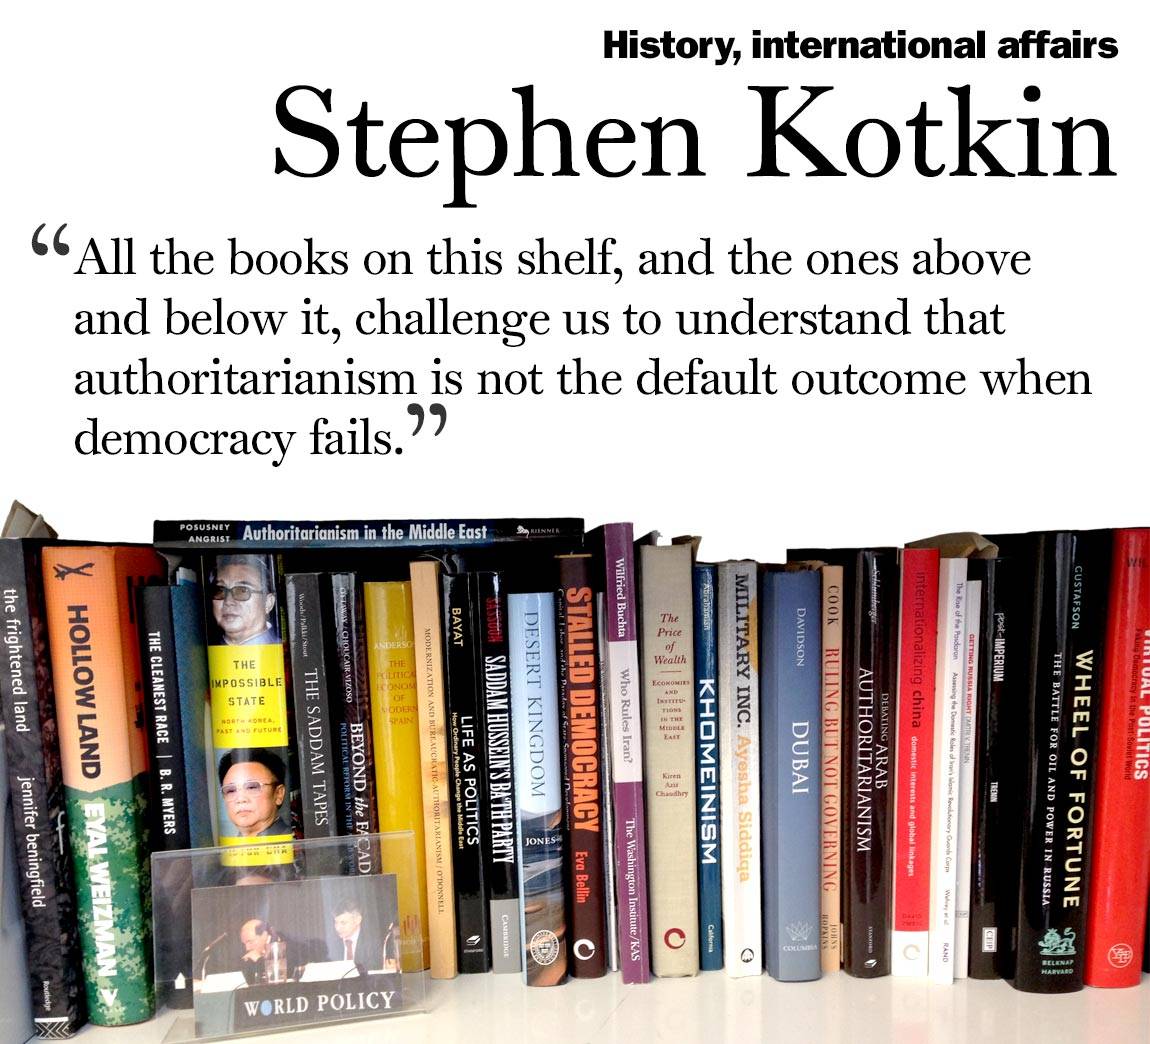 “All the books on this shelf, and the ones above  and below it, challenge us to understand that authoritarianism is not the default outcome when democracy fails.” Stephen Kotkin, history, international affairs